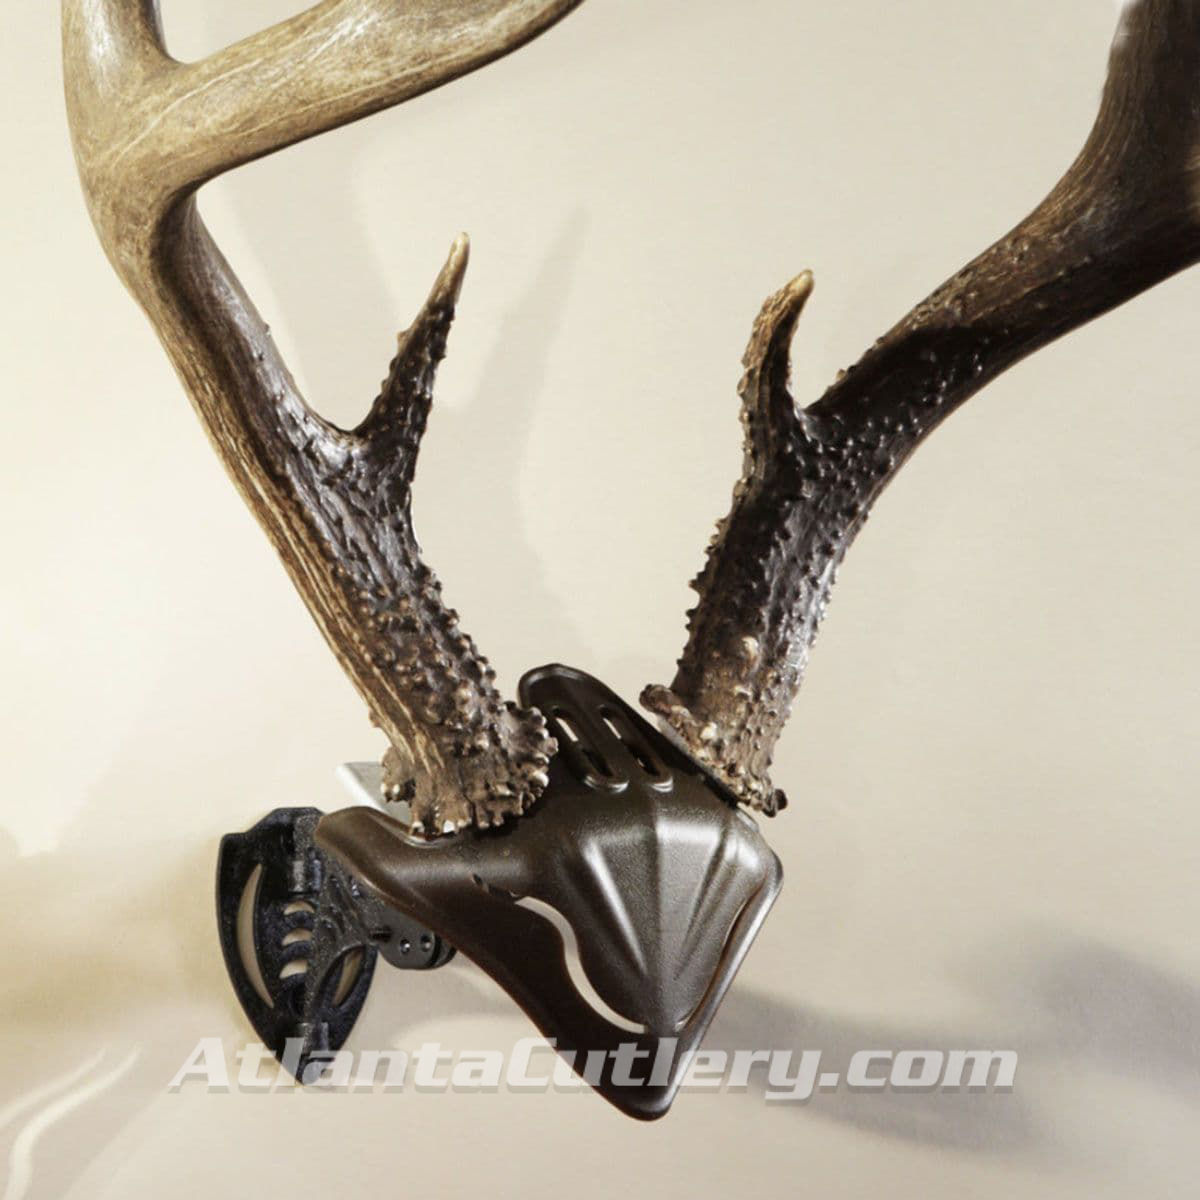 Bone Bracket/Skull Cap Combo for small to mid-sized species like deer with powder-coated steel arm  hang trophies up to 20 lbs